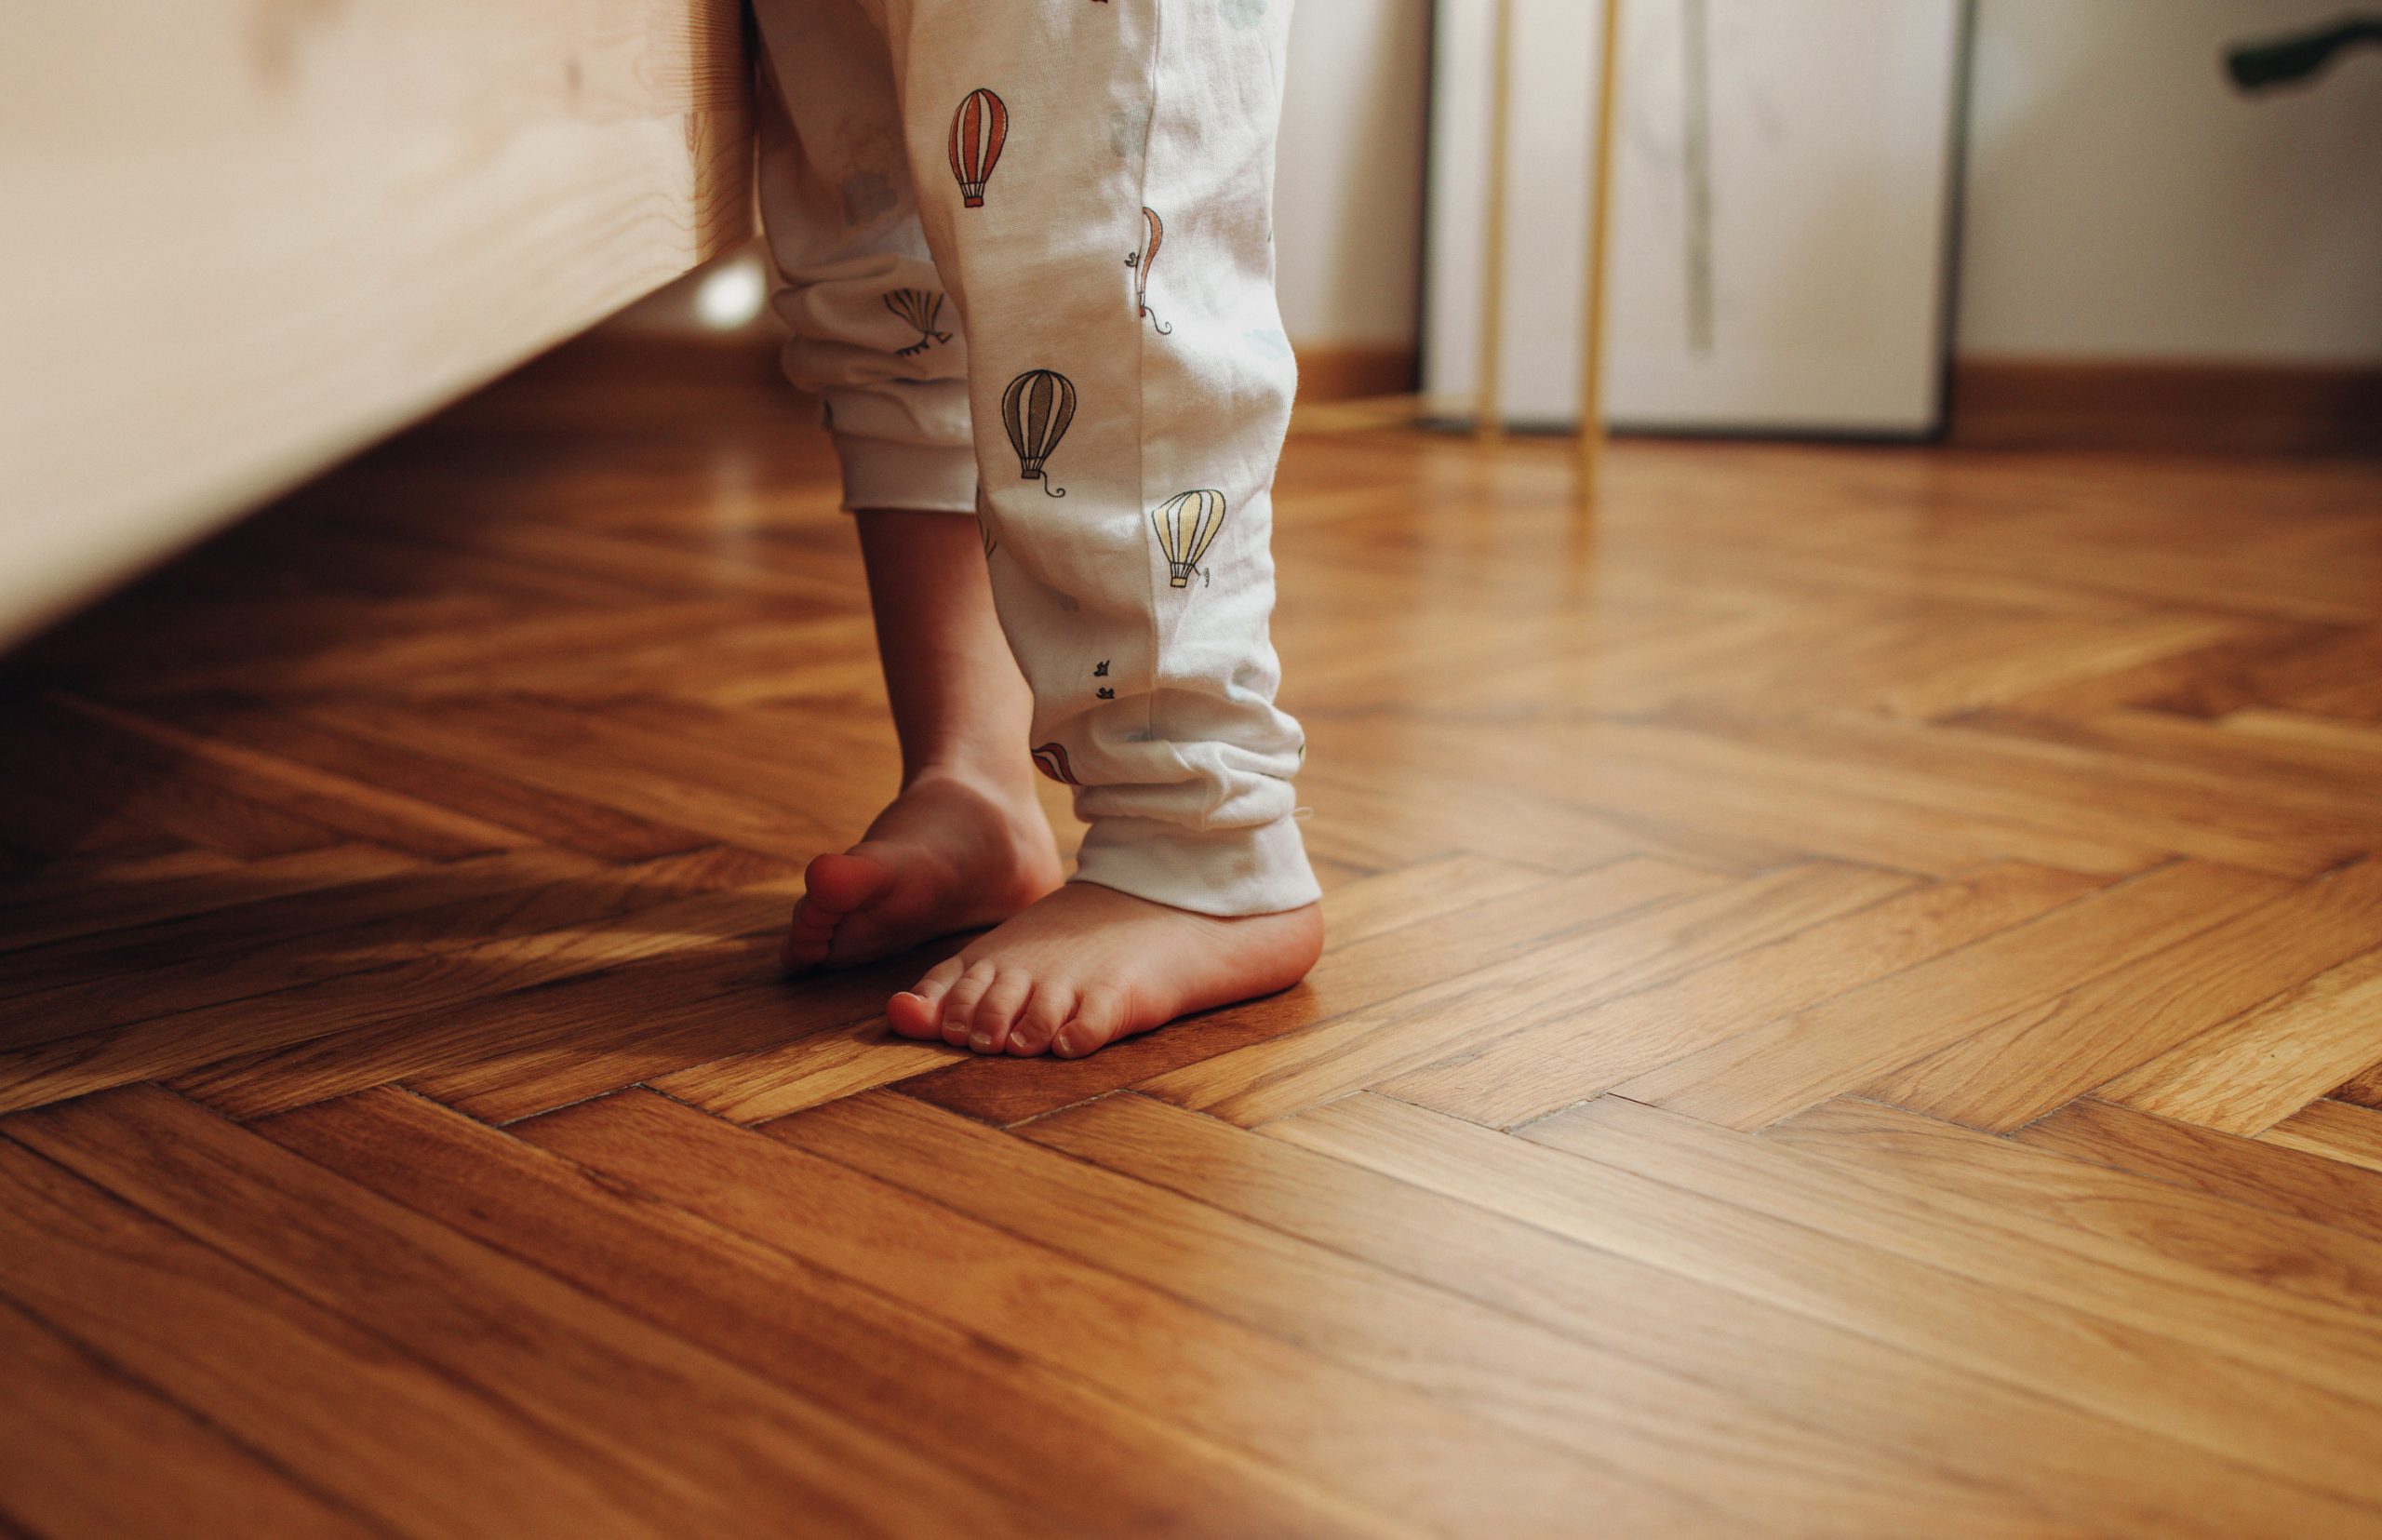 5 Things You Should Never Do To Your Home’s Wood Flooring